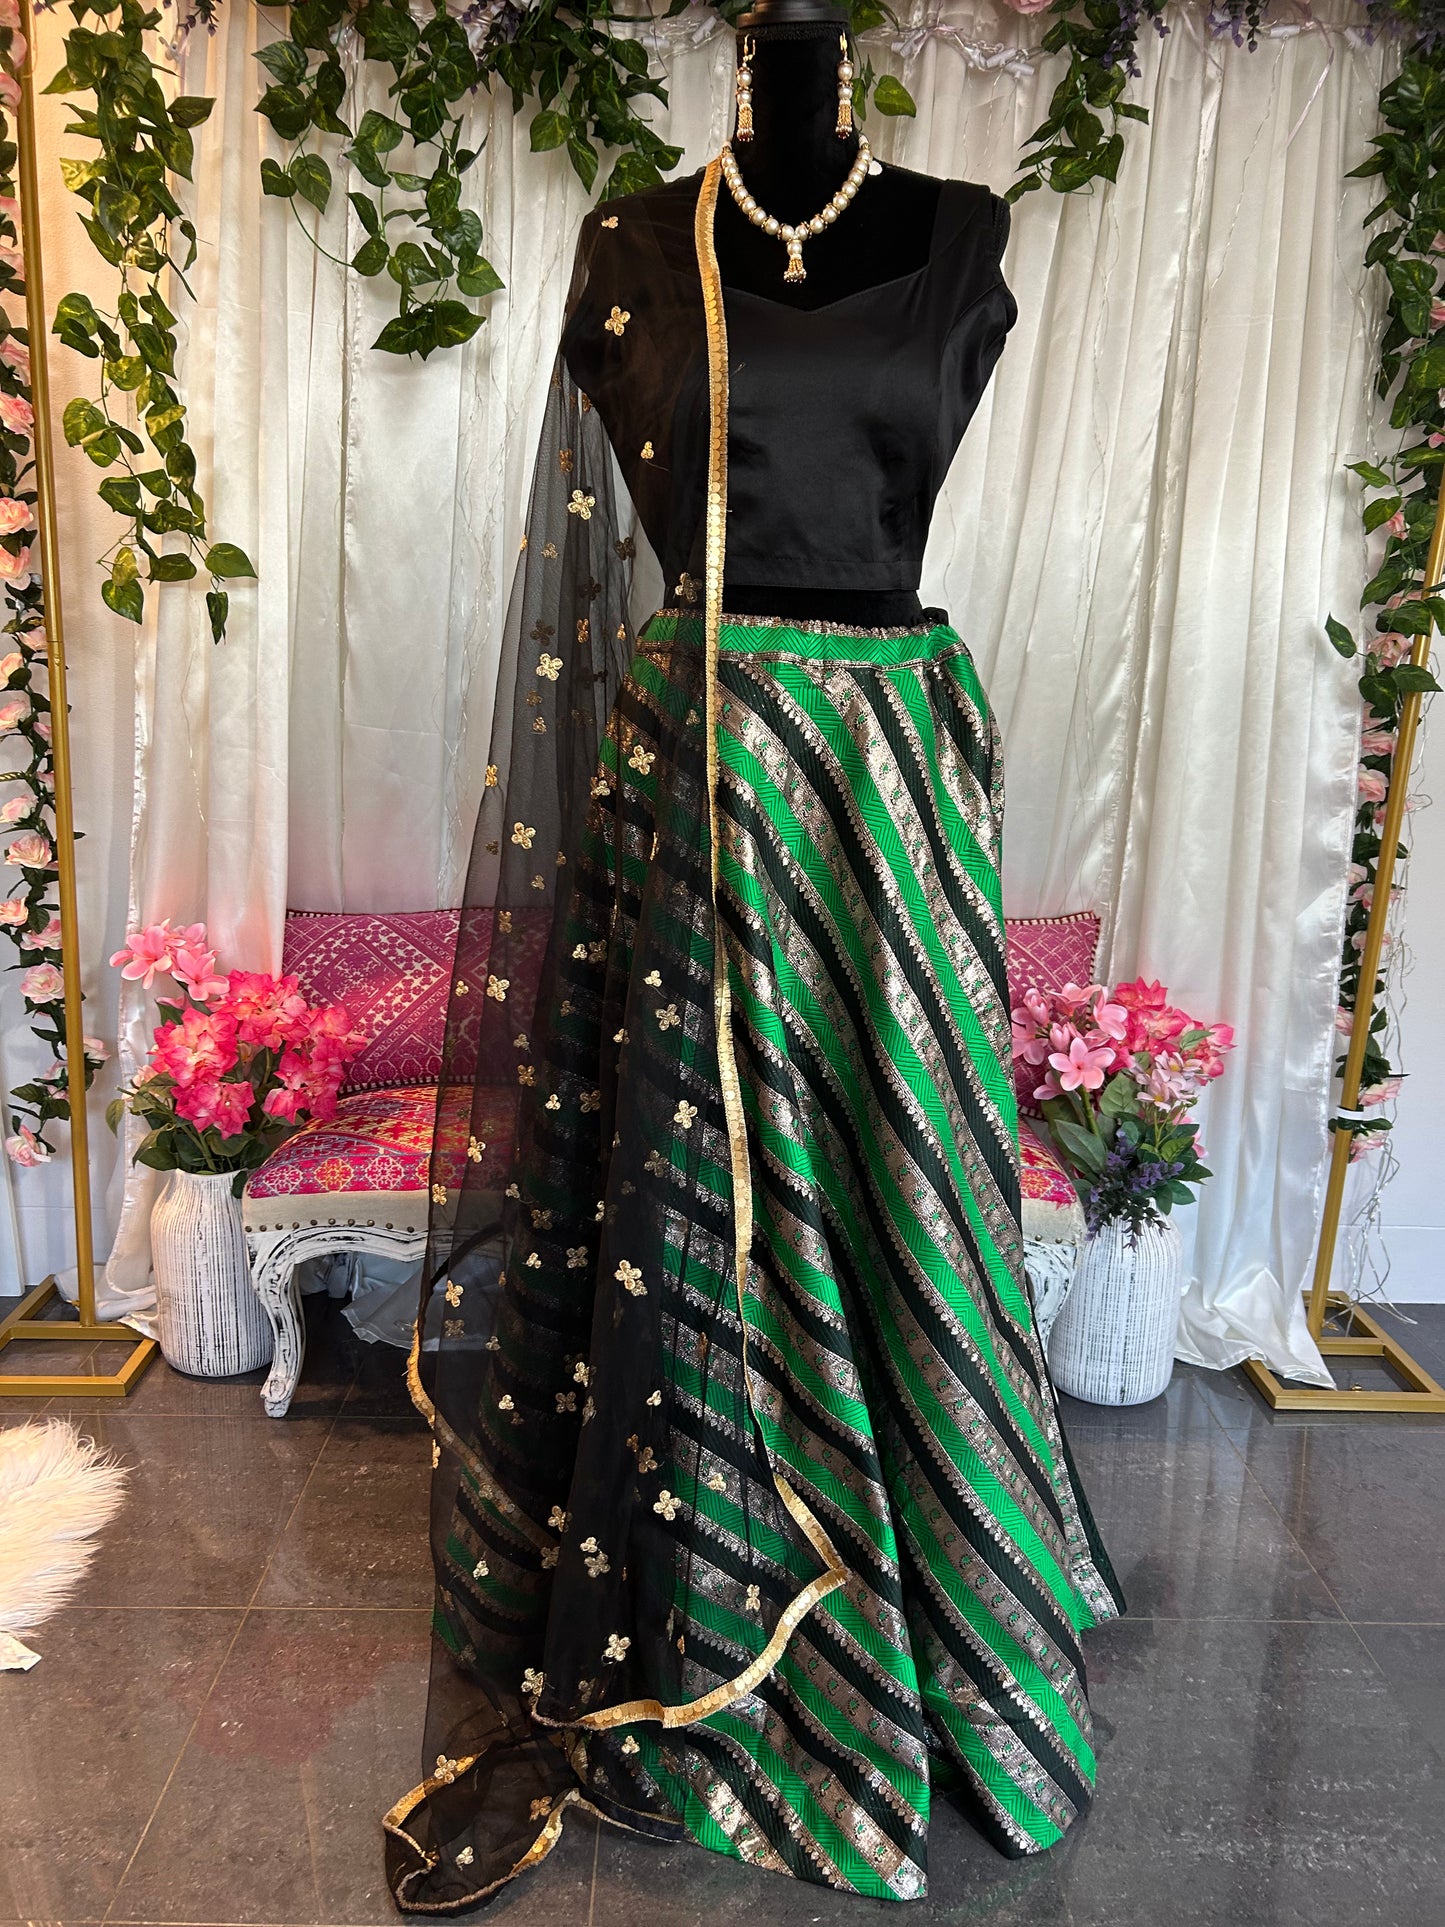 Green and Gold Lehenga with Blouse and Dupatta